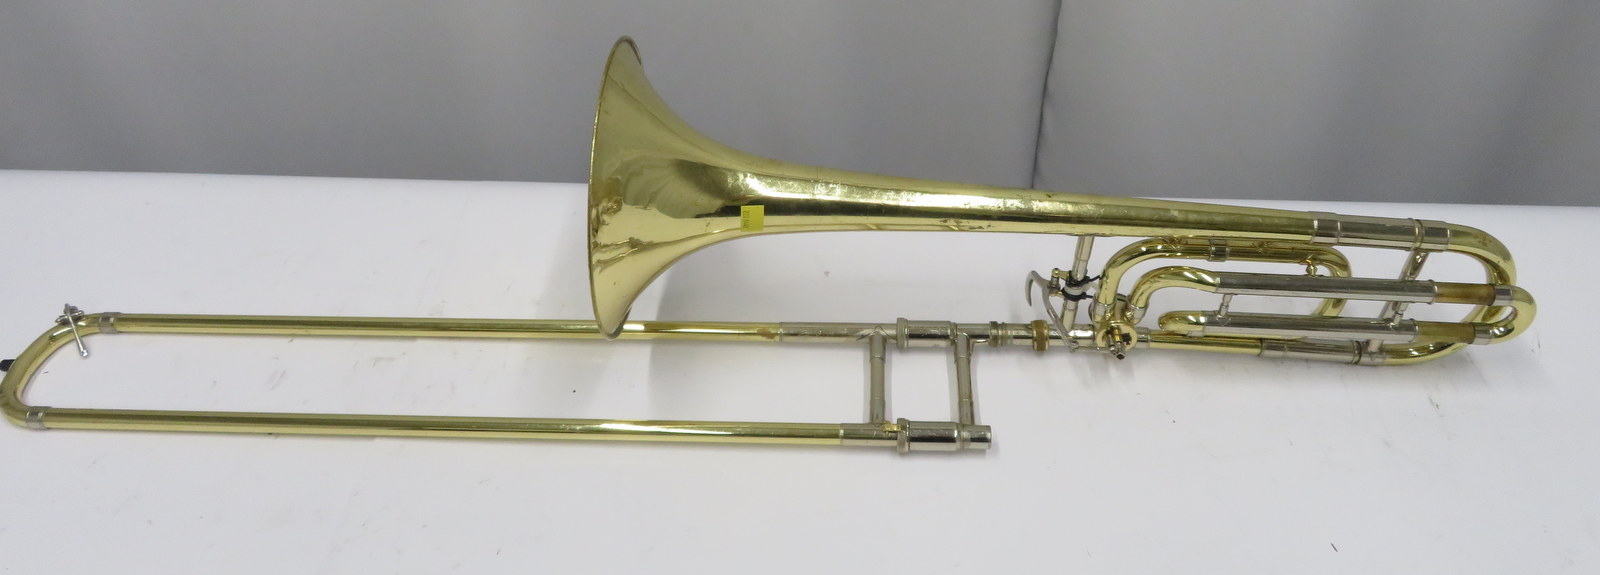 Bach Stradivarius model 42 trombone with case. Serial number: 41004. - Image 2 of 14